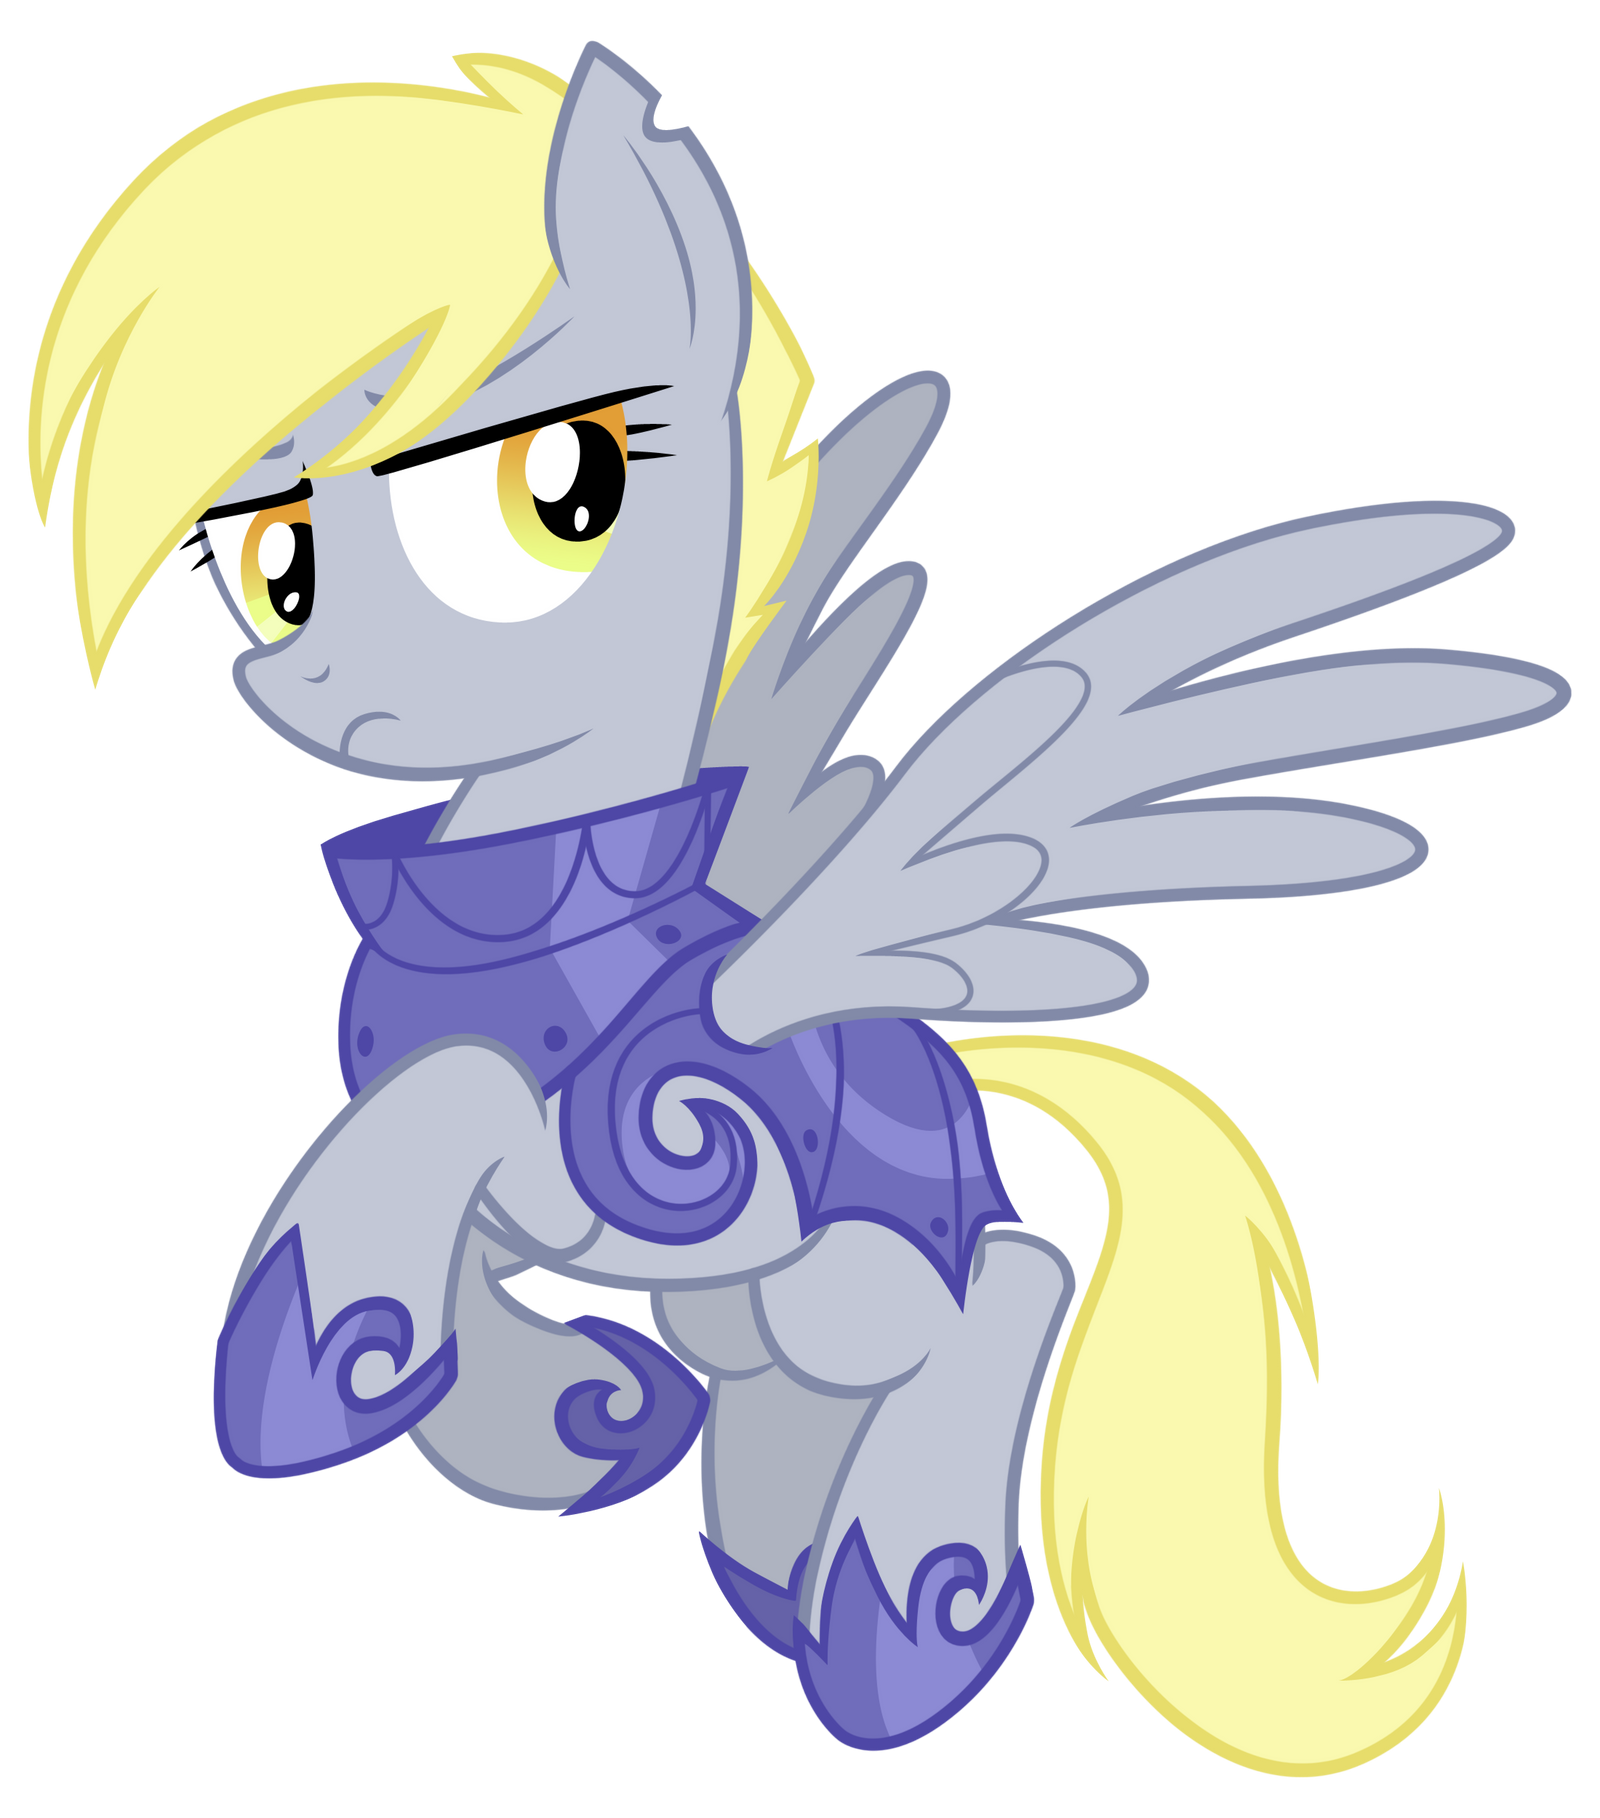 general_derpy_4_by_equestria_prevails-d4